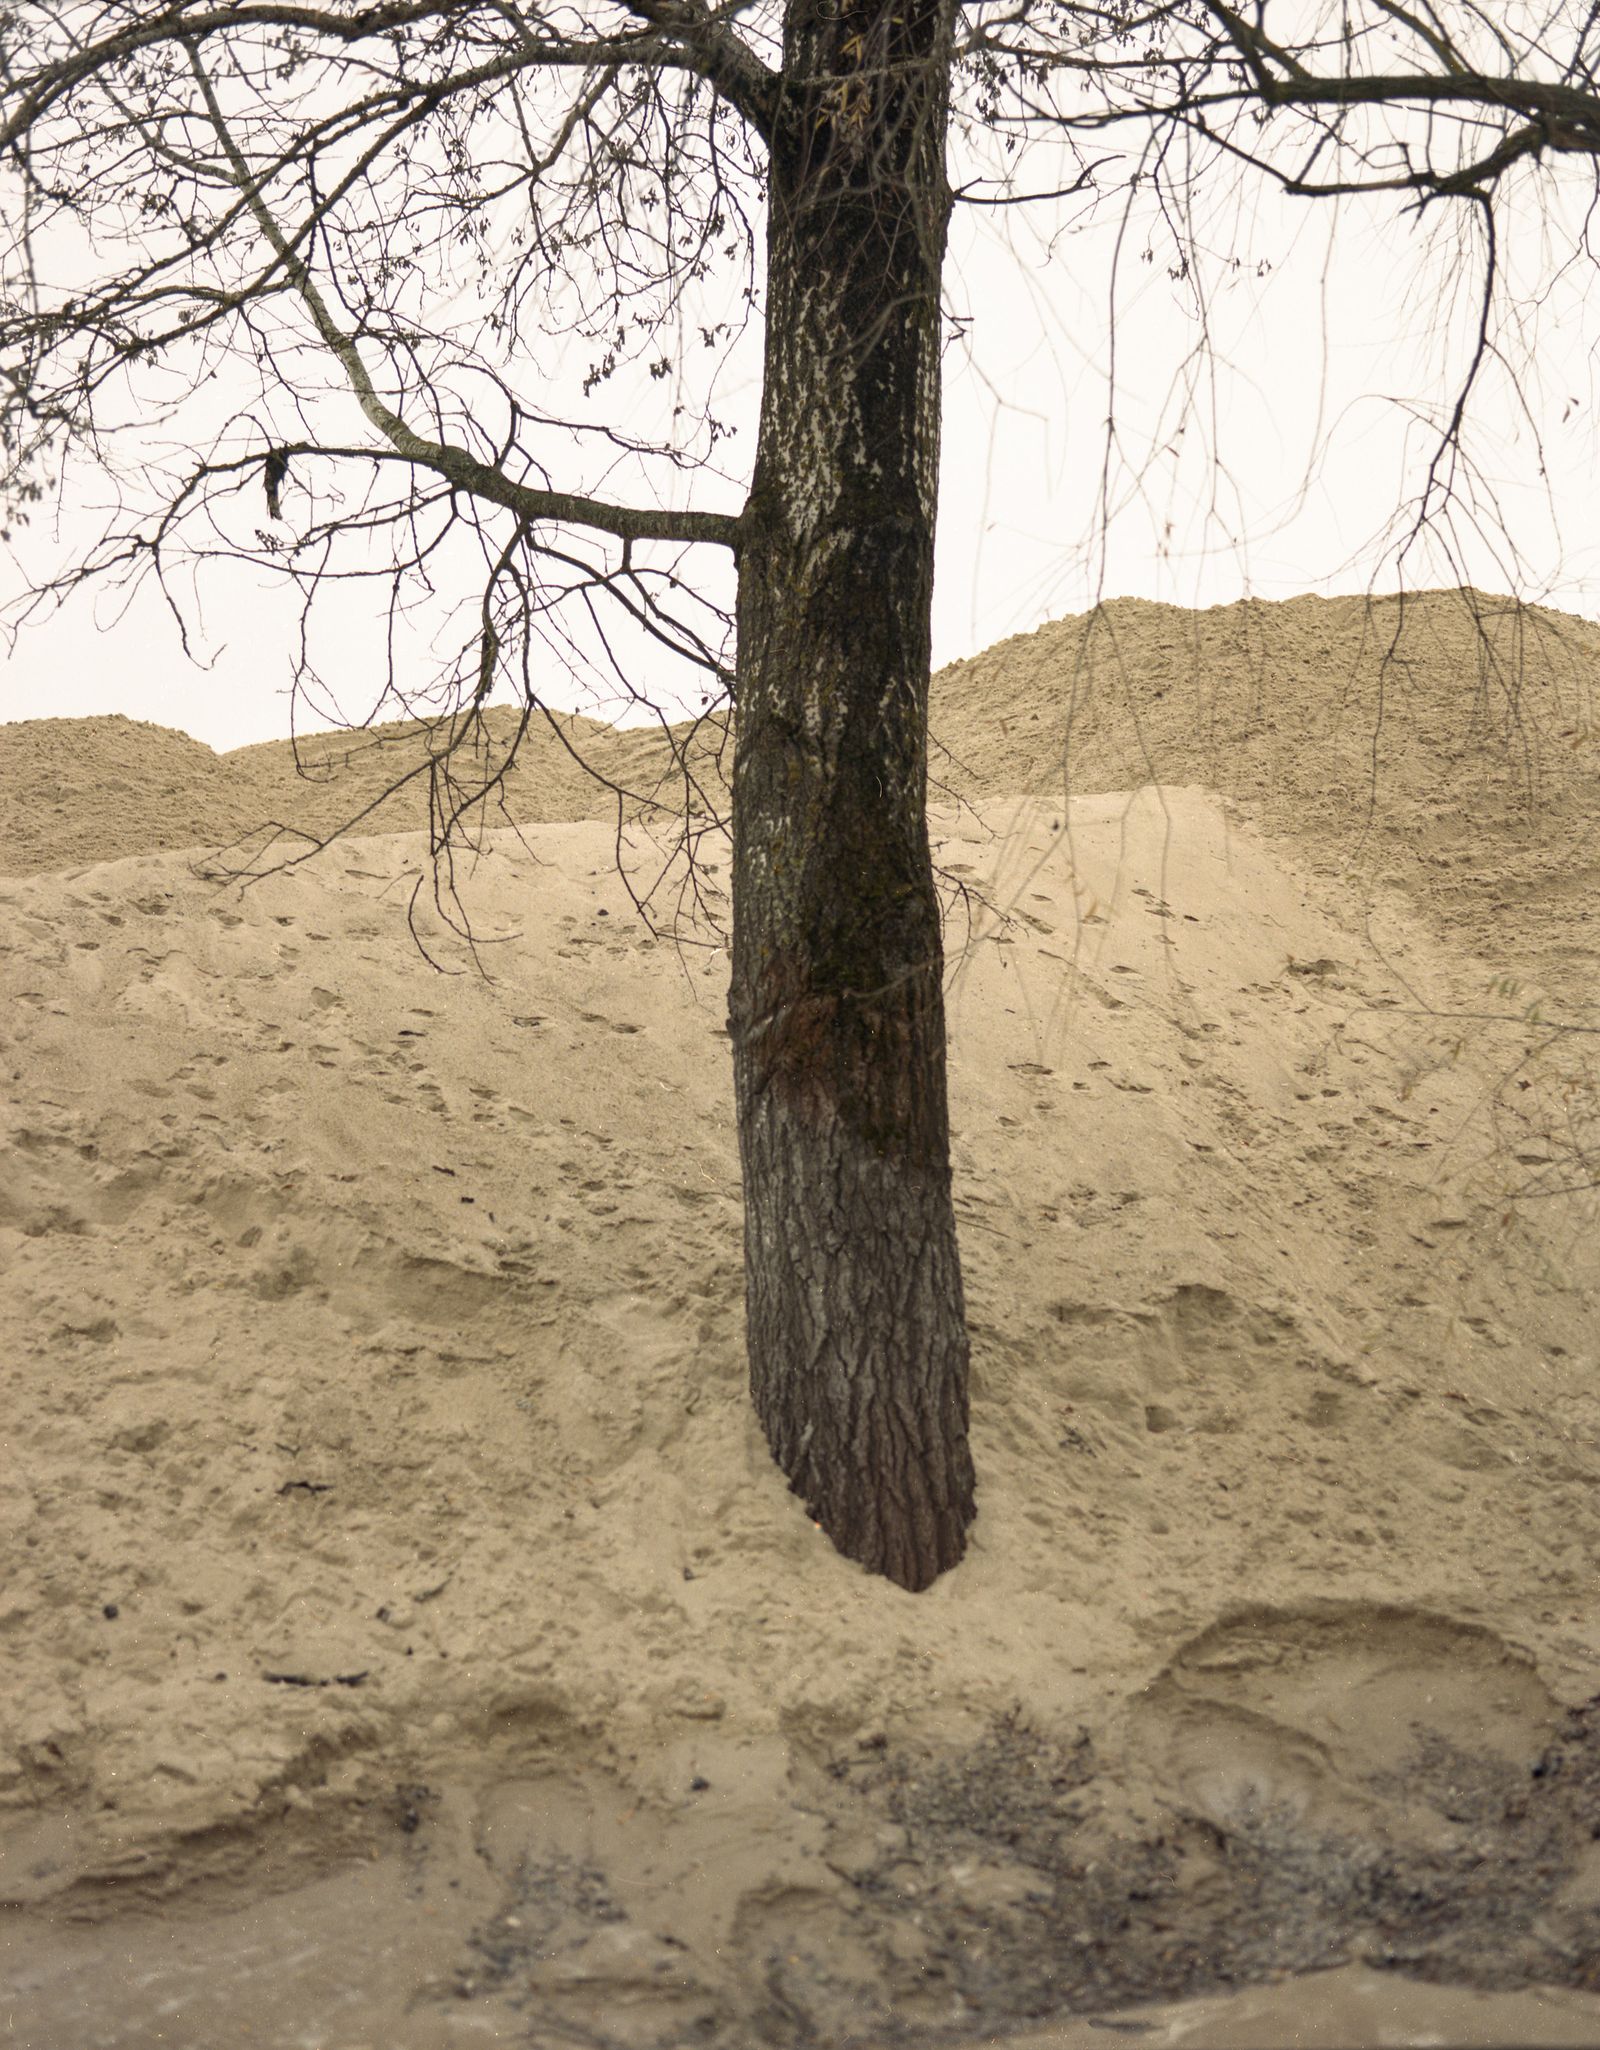 © Jakub Stanek - Image from the Let's build a sandcastle photography project